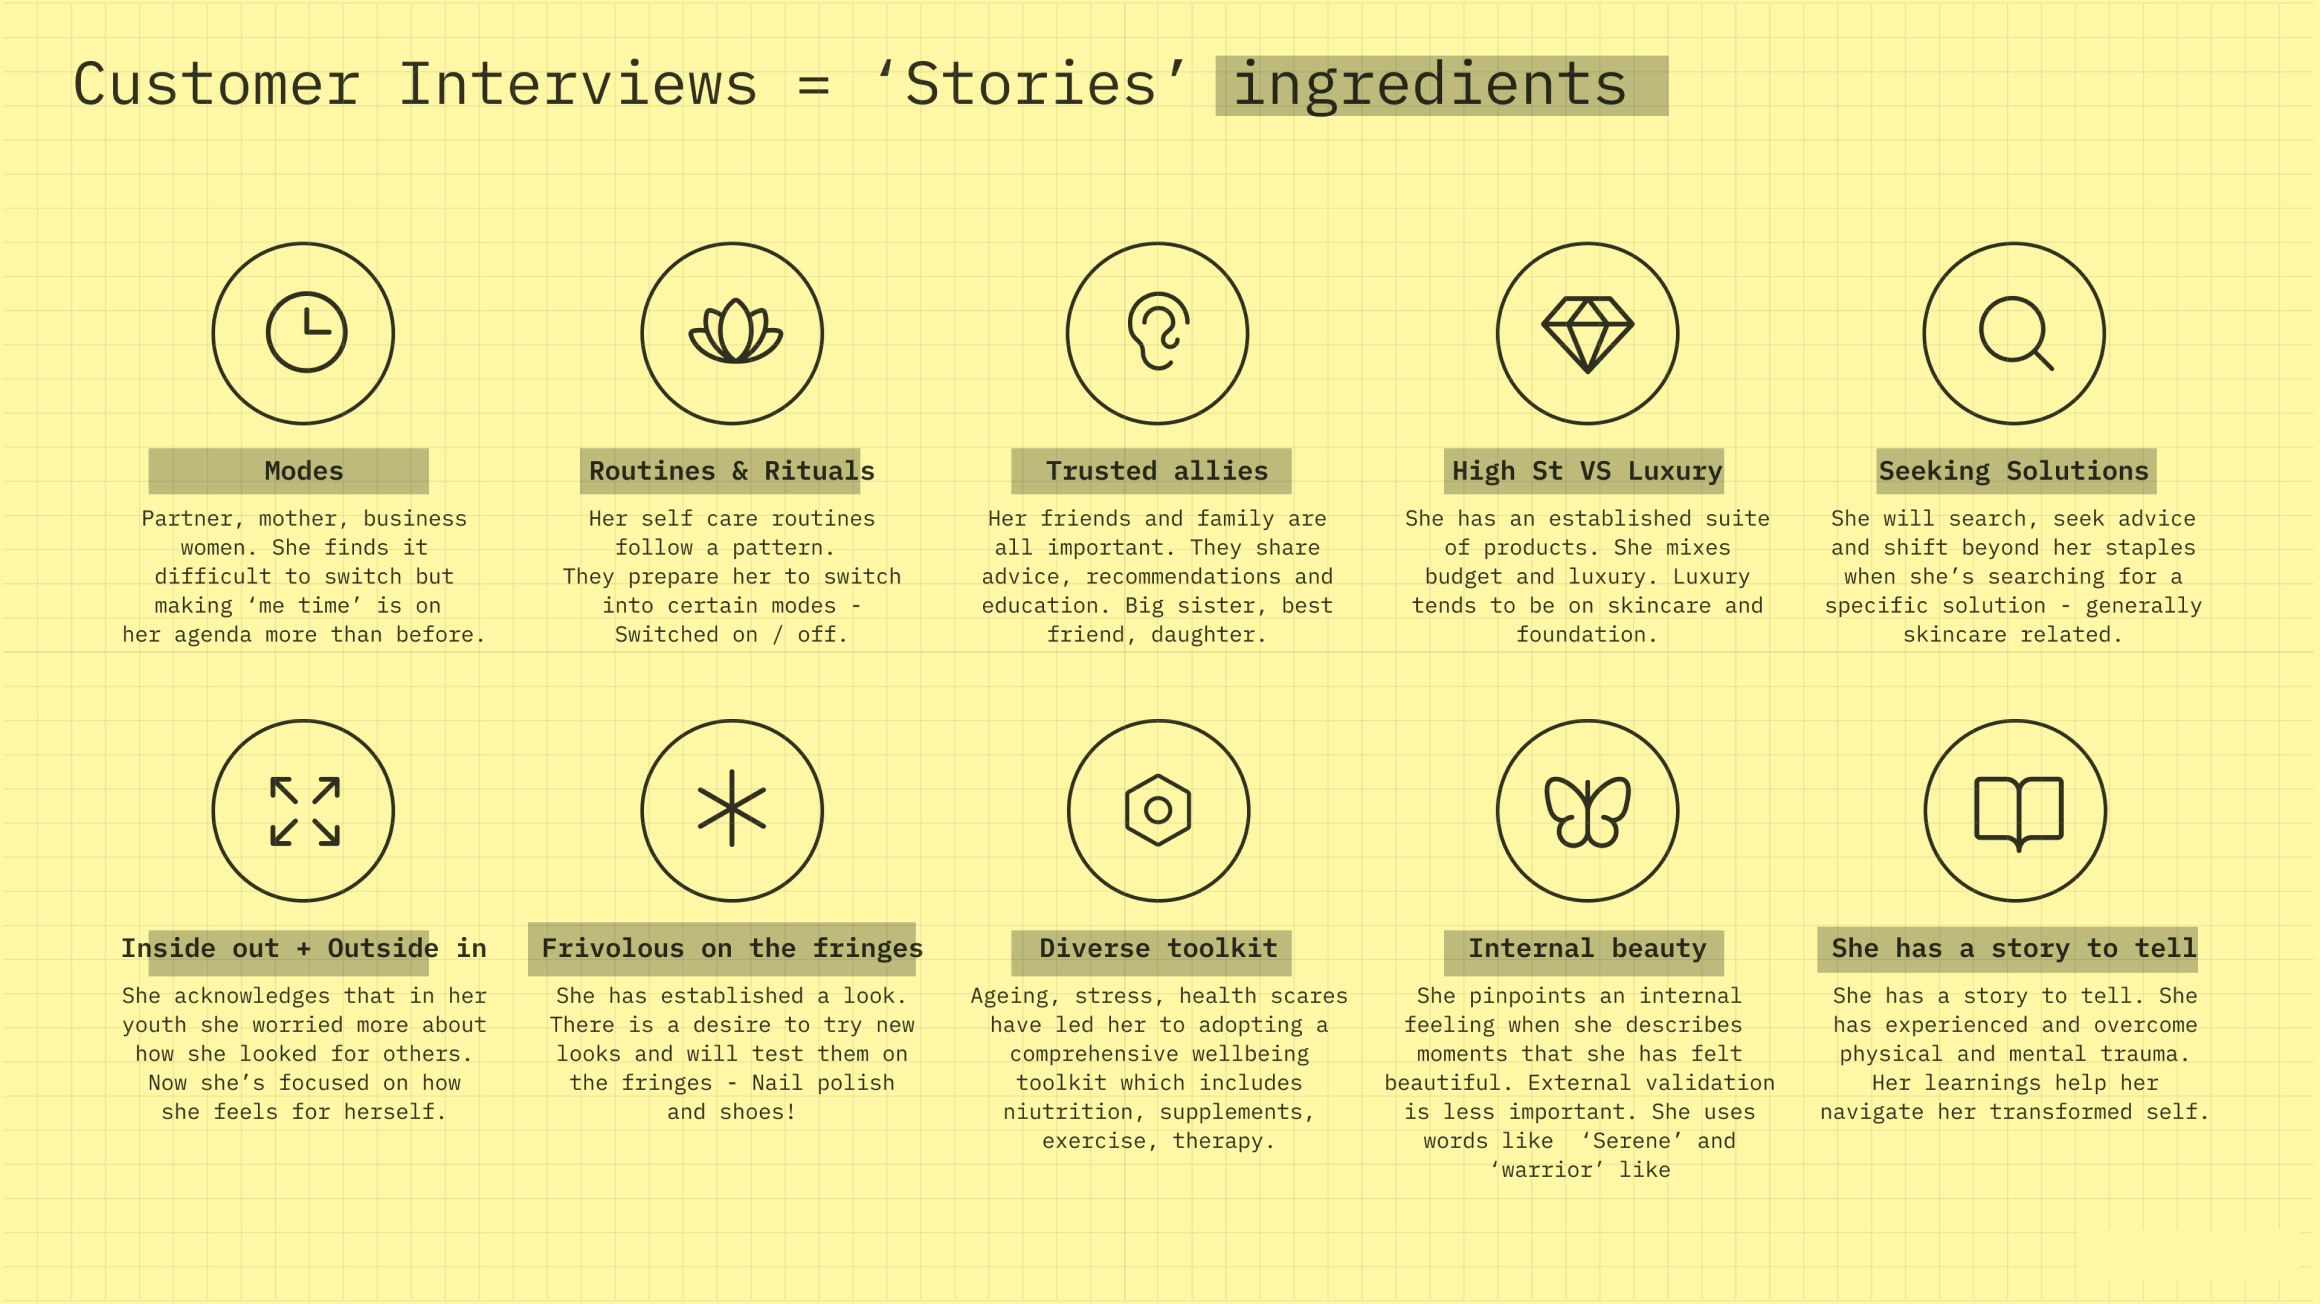 'Stories' ingredients based on customer insights